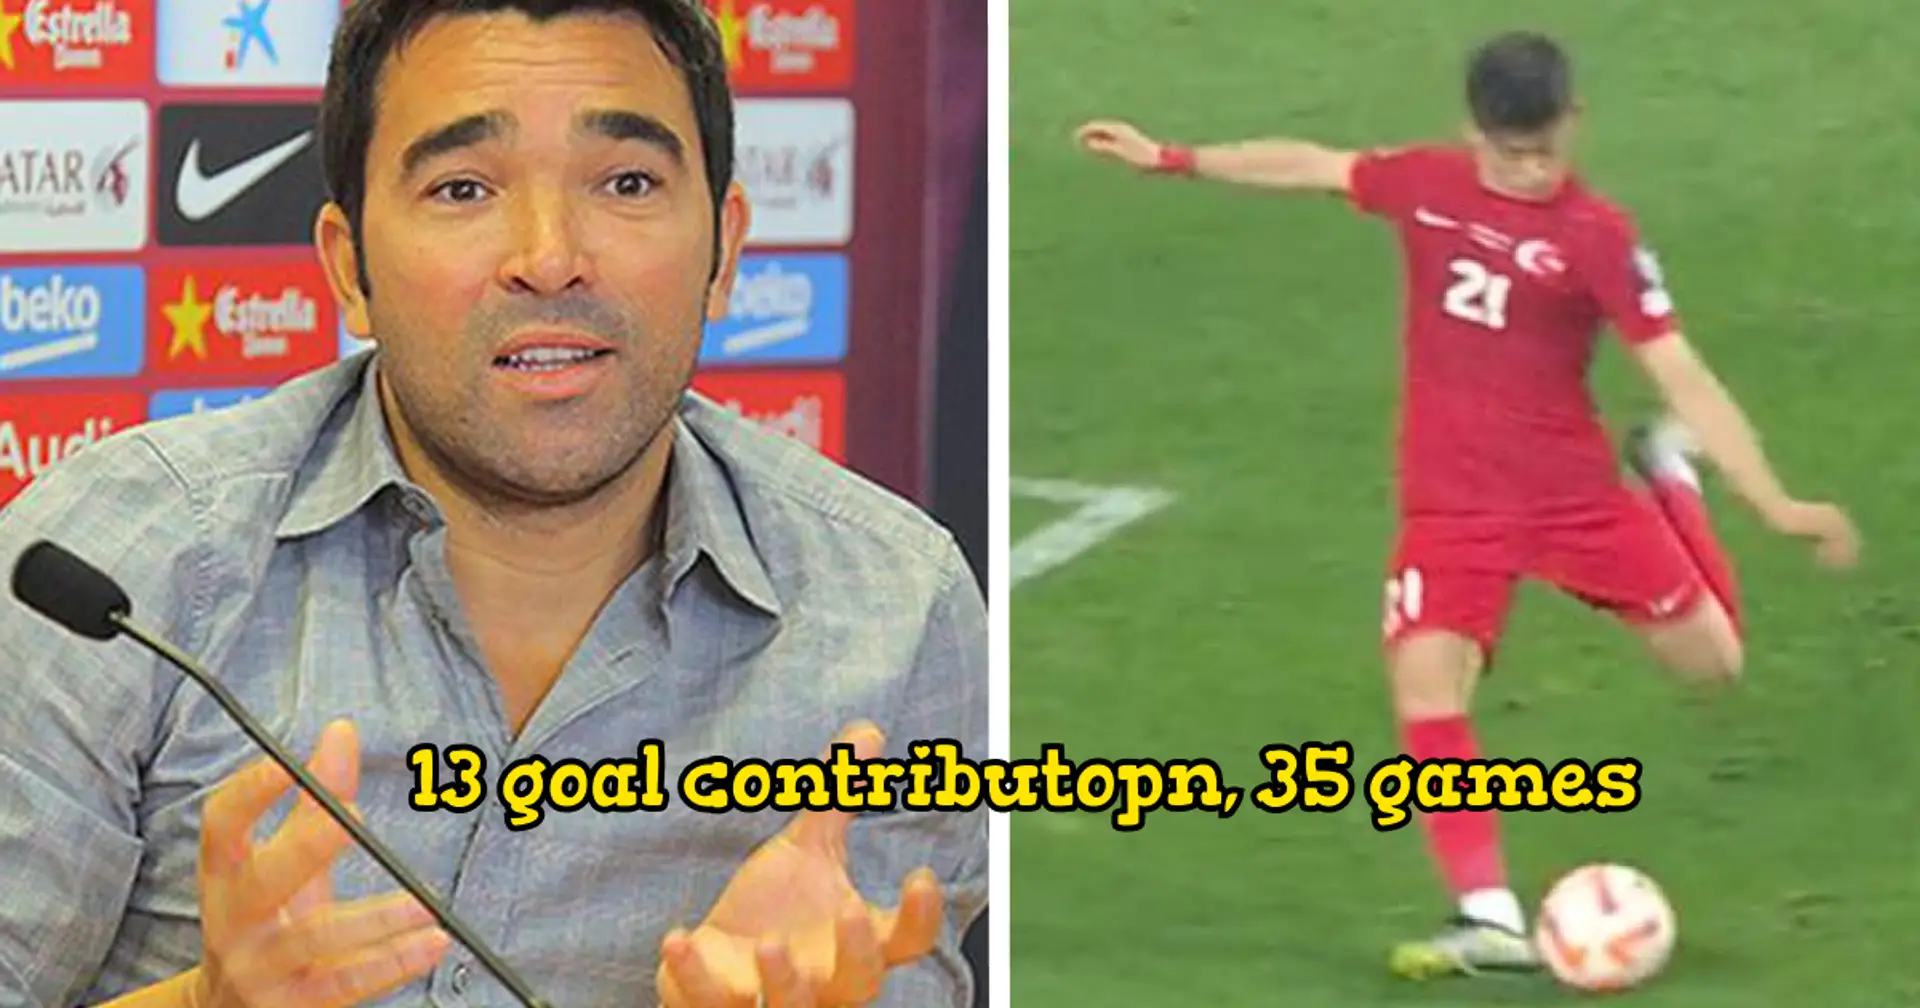 Deco pushing Barca to sign €17m-rated teenager who 'dominated Turkish league' last season